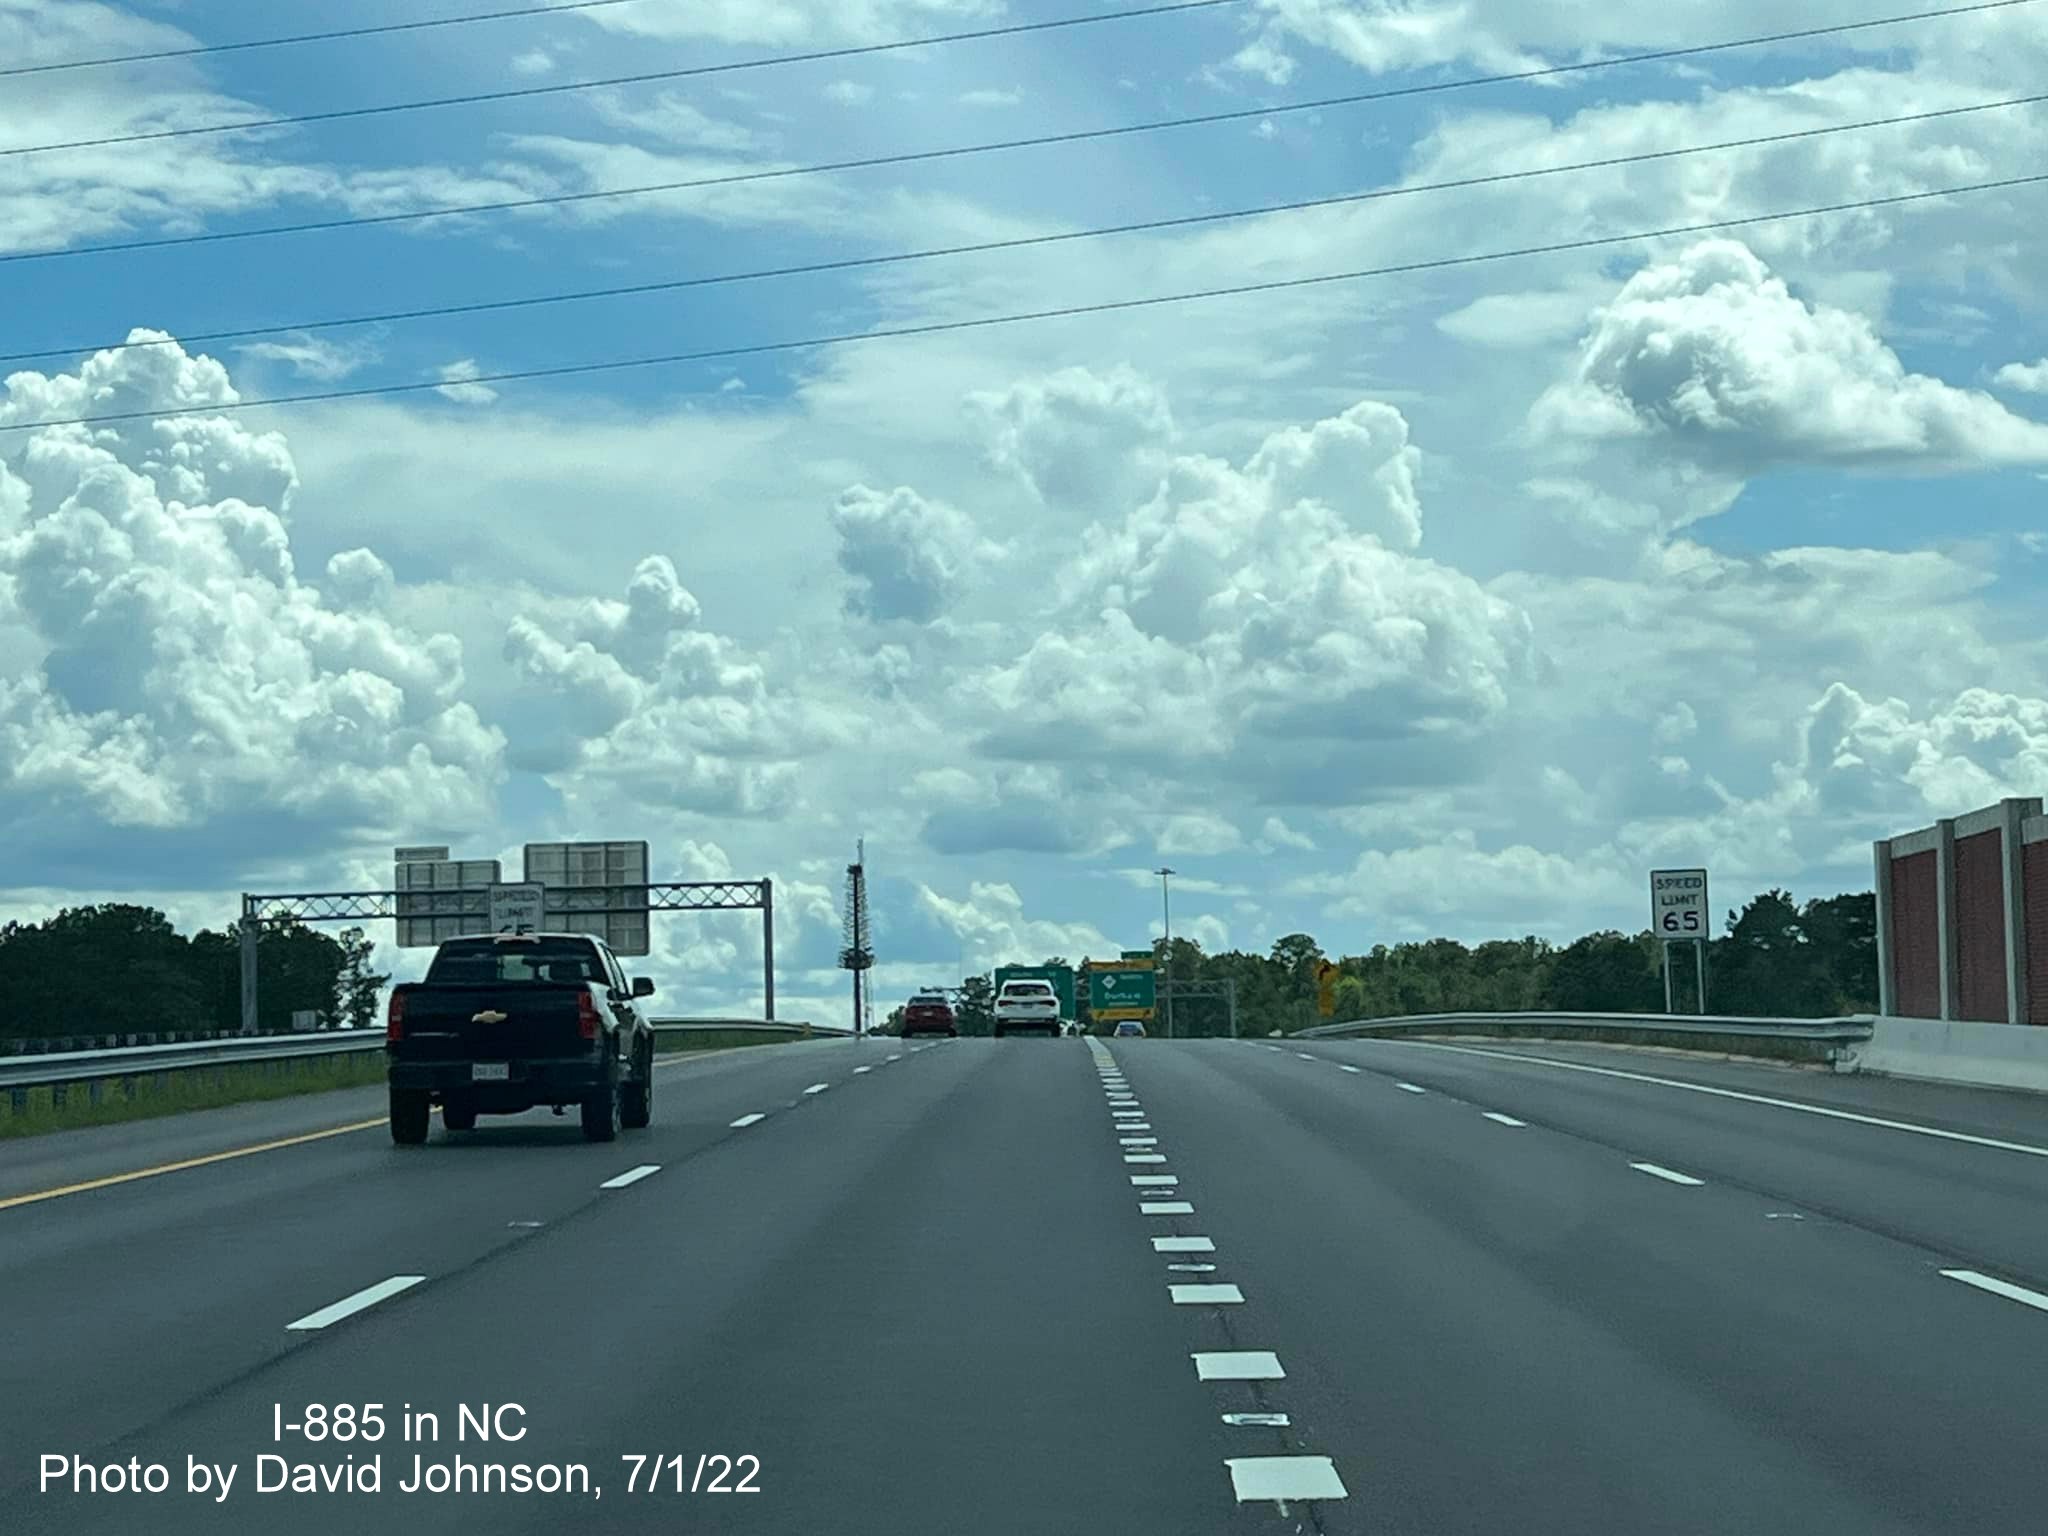 Image of 65 MPH signs on I-885 South/East End Connector in Durham, by David Johnson July 2022